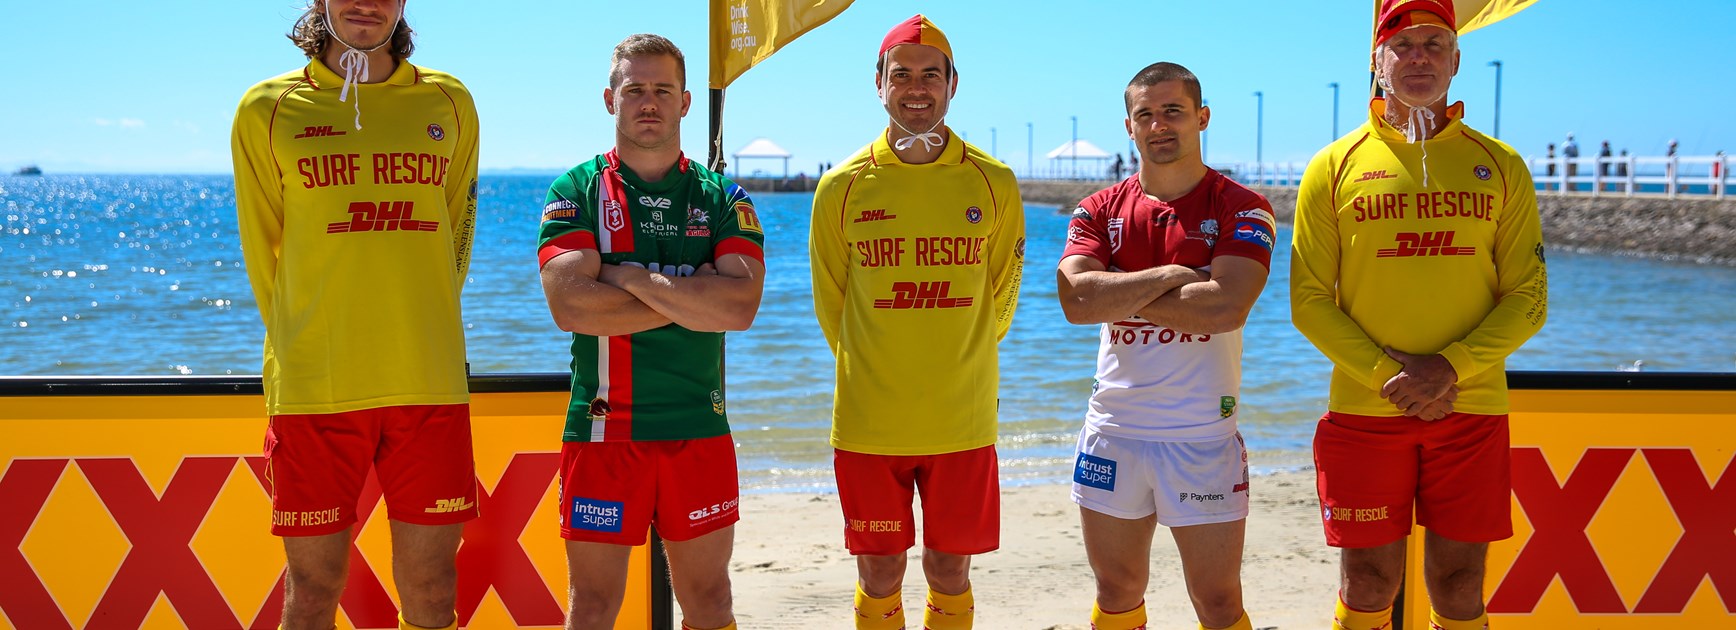 Battle of the Bayside headlines XXXX Rivalry Round to support Surf Life Saving Queensland